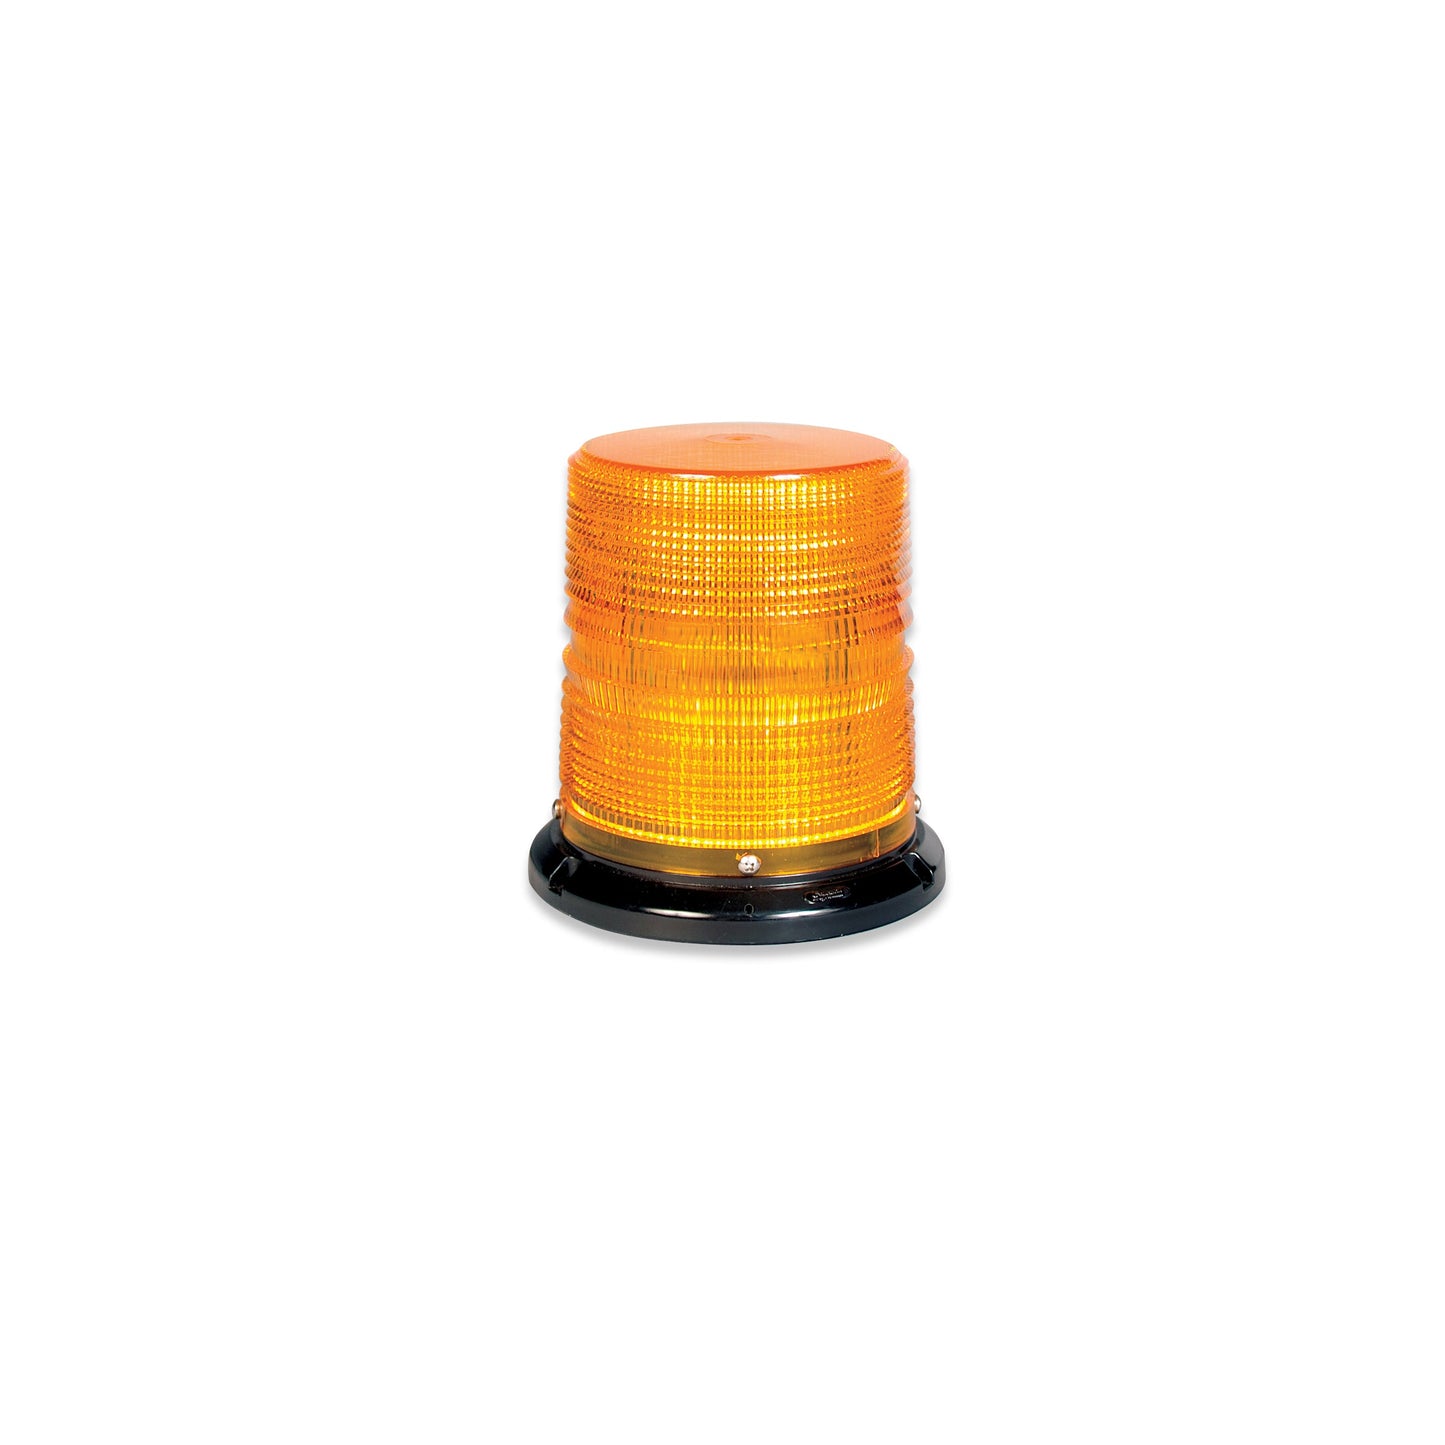 Soundoff Signal ELB45BCH0GC 4500 Series Led Beacon, 10-30V, Sae J845 Class 1 - Flat/Pipe Mount, 6" Clear Dome/ Green Leds